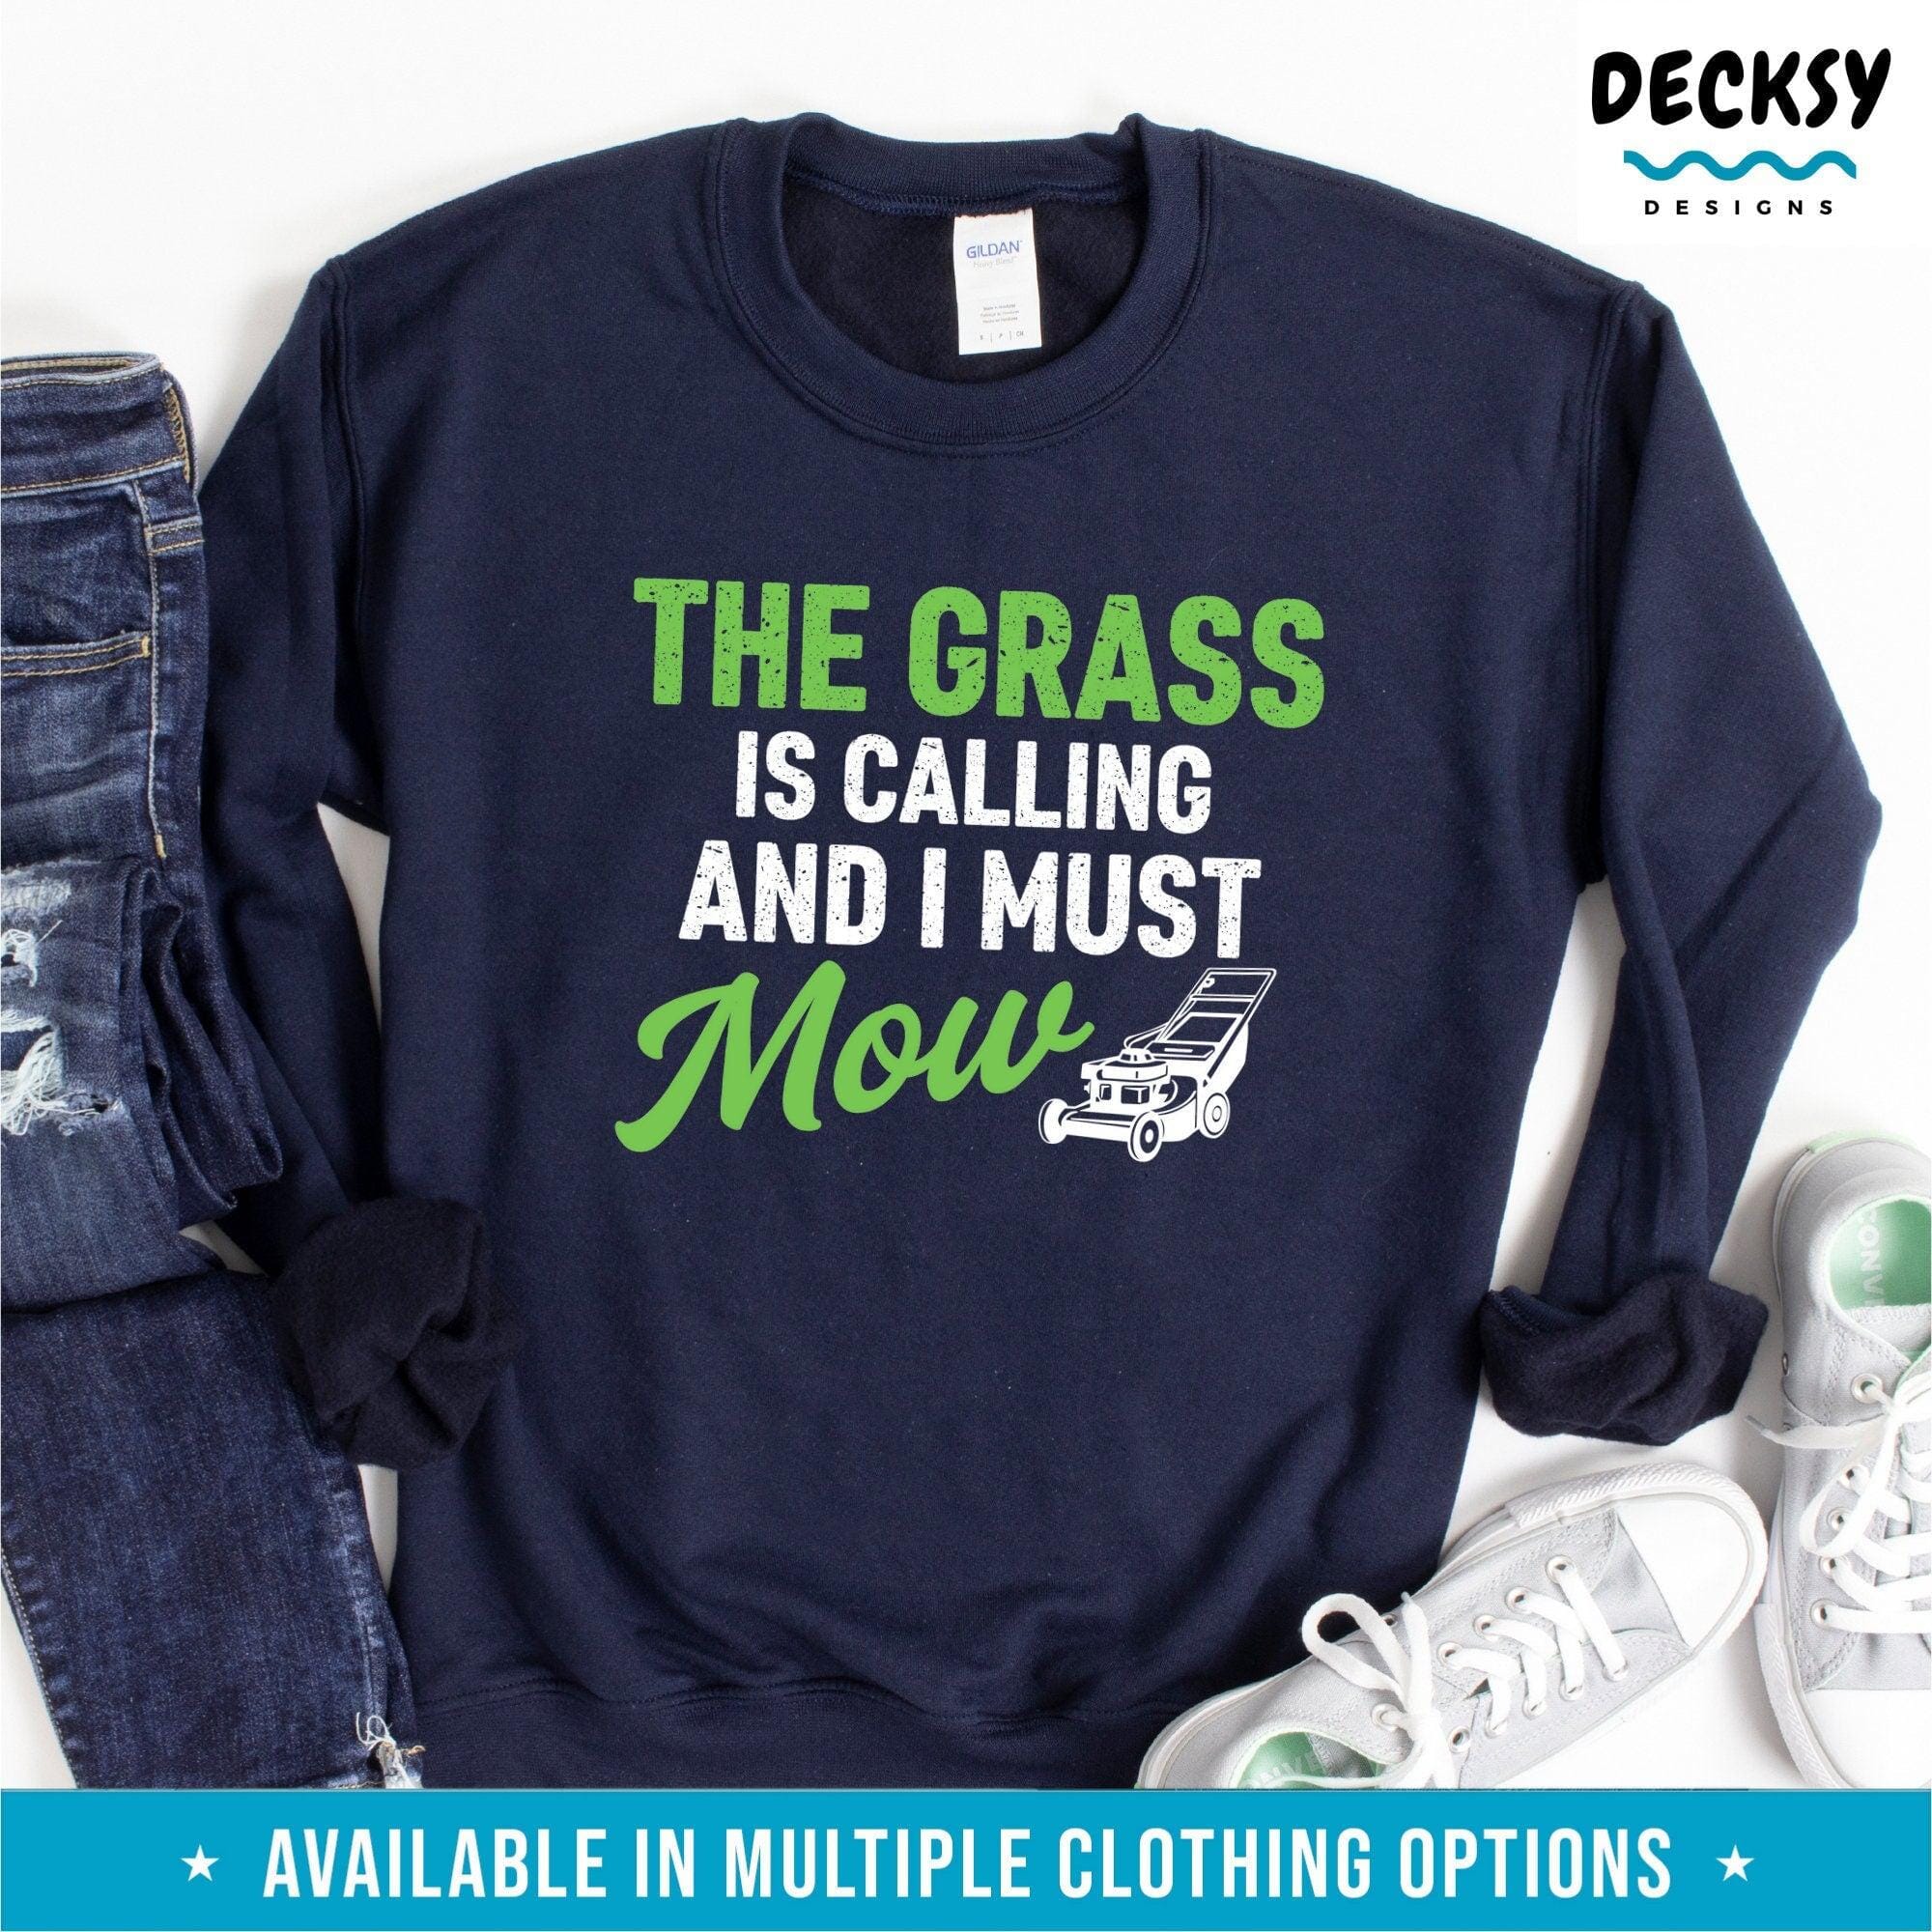 Lawn Mower Shirt, Lawn Mowing Gift For Gardener-Clothing:Gender-Neutral Adult Clothing:Tops & Tees:T-shirts:Graphic Tees-DecksyDesigns